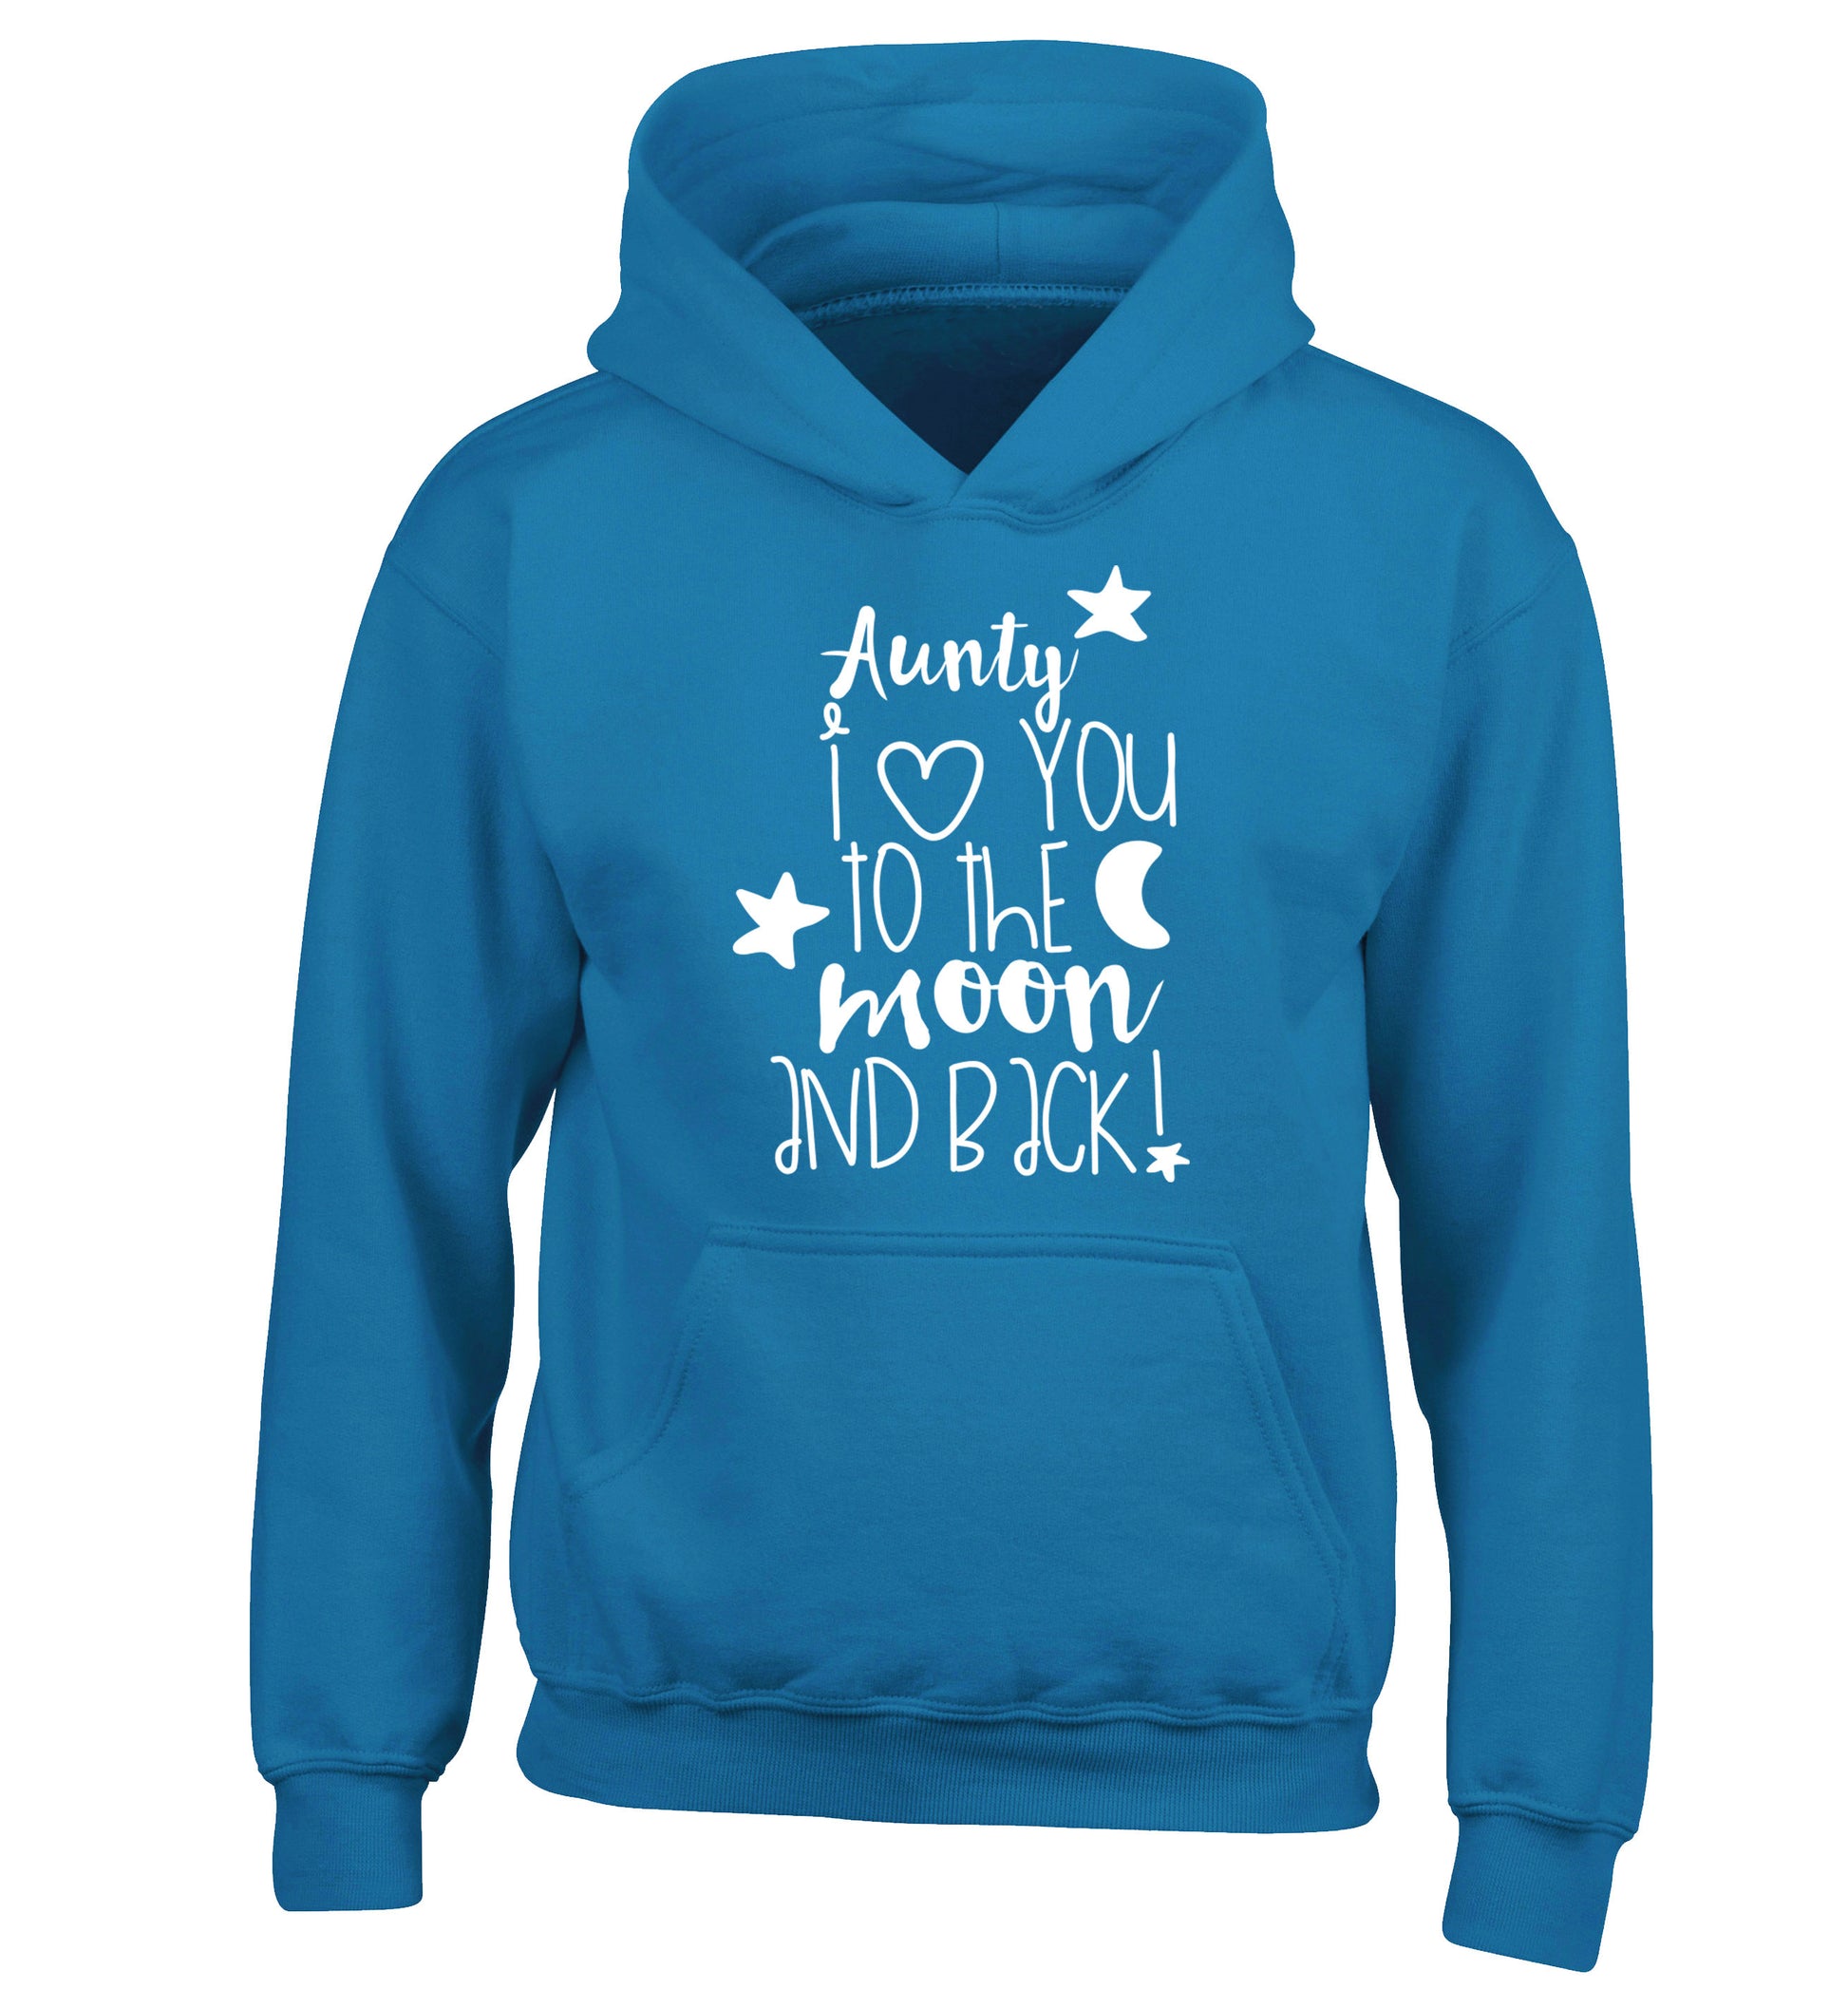 Aunty I love you to the moon and back children's blue hoodie 12-14 Years